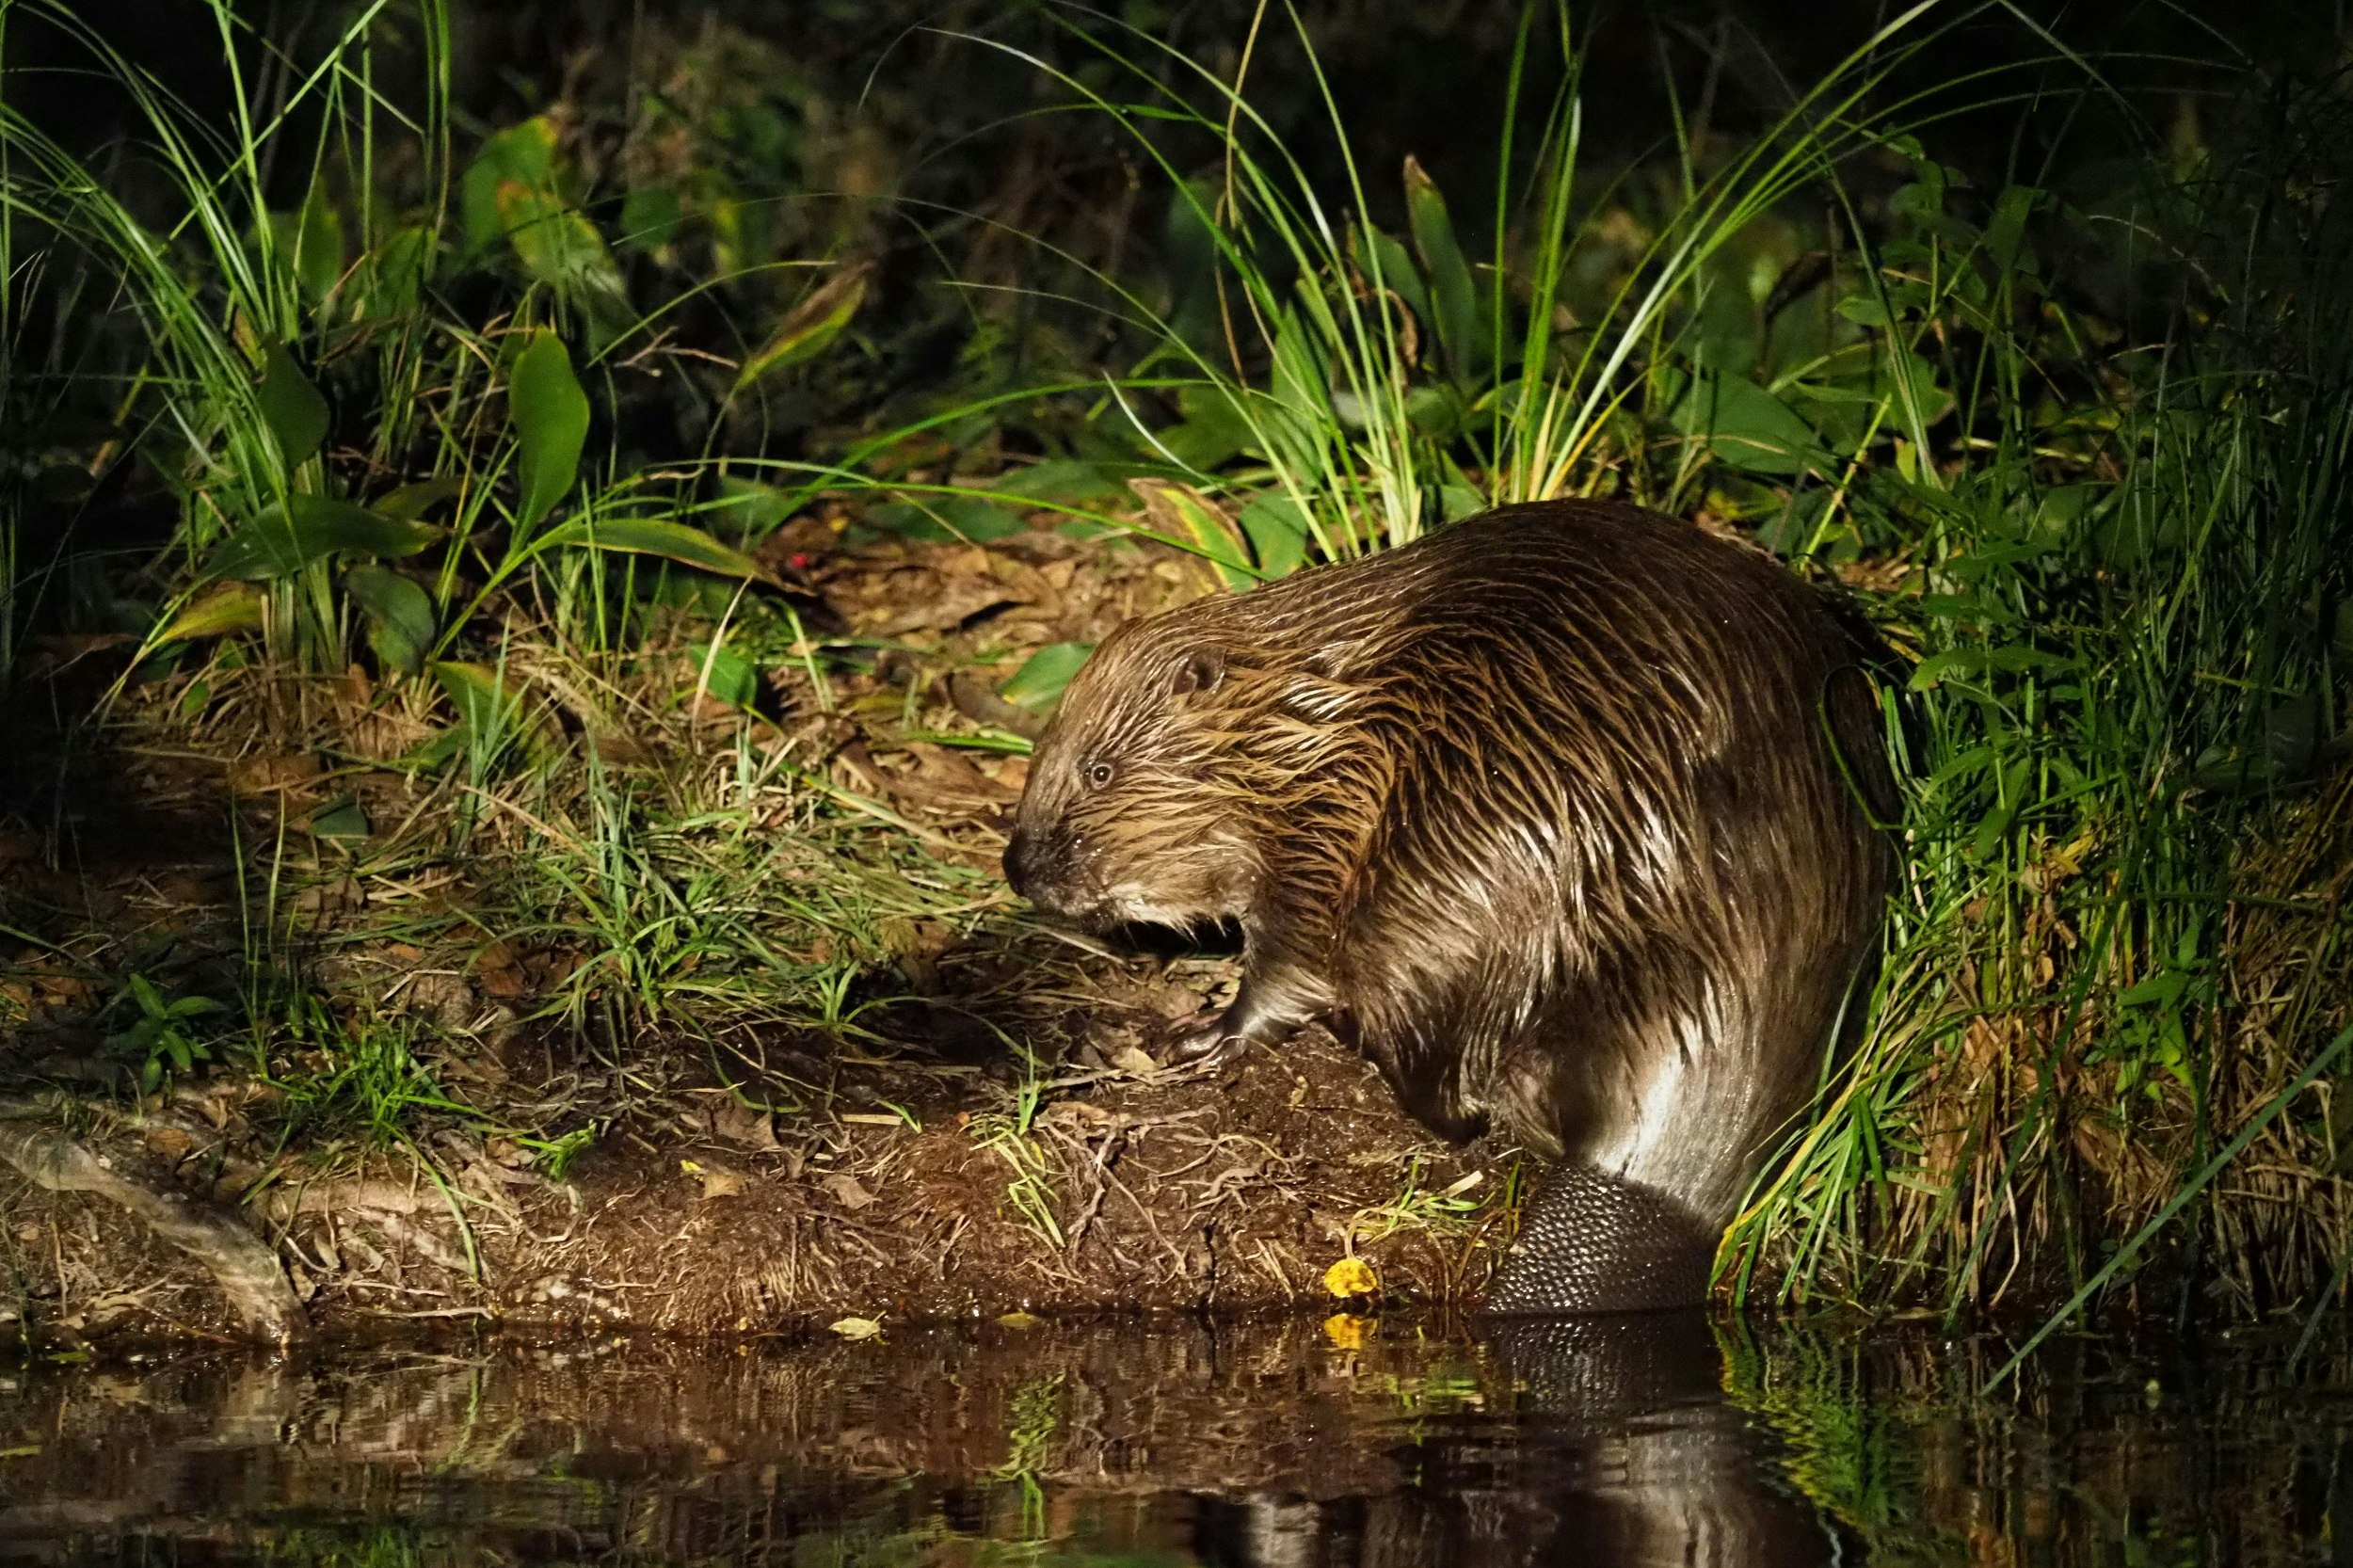 A wet beaver huddles on the shore of a lake near long grass and chews on some wood; it is dark, but the animal is lit up with a spot light.